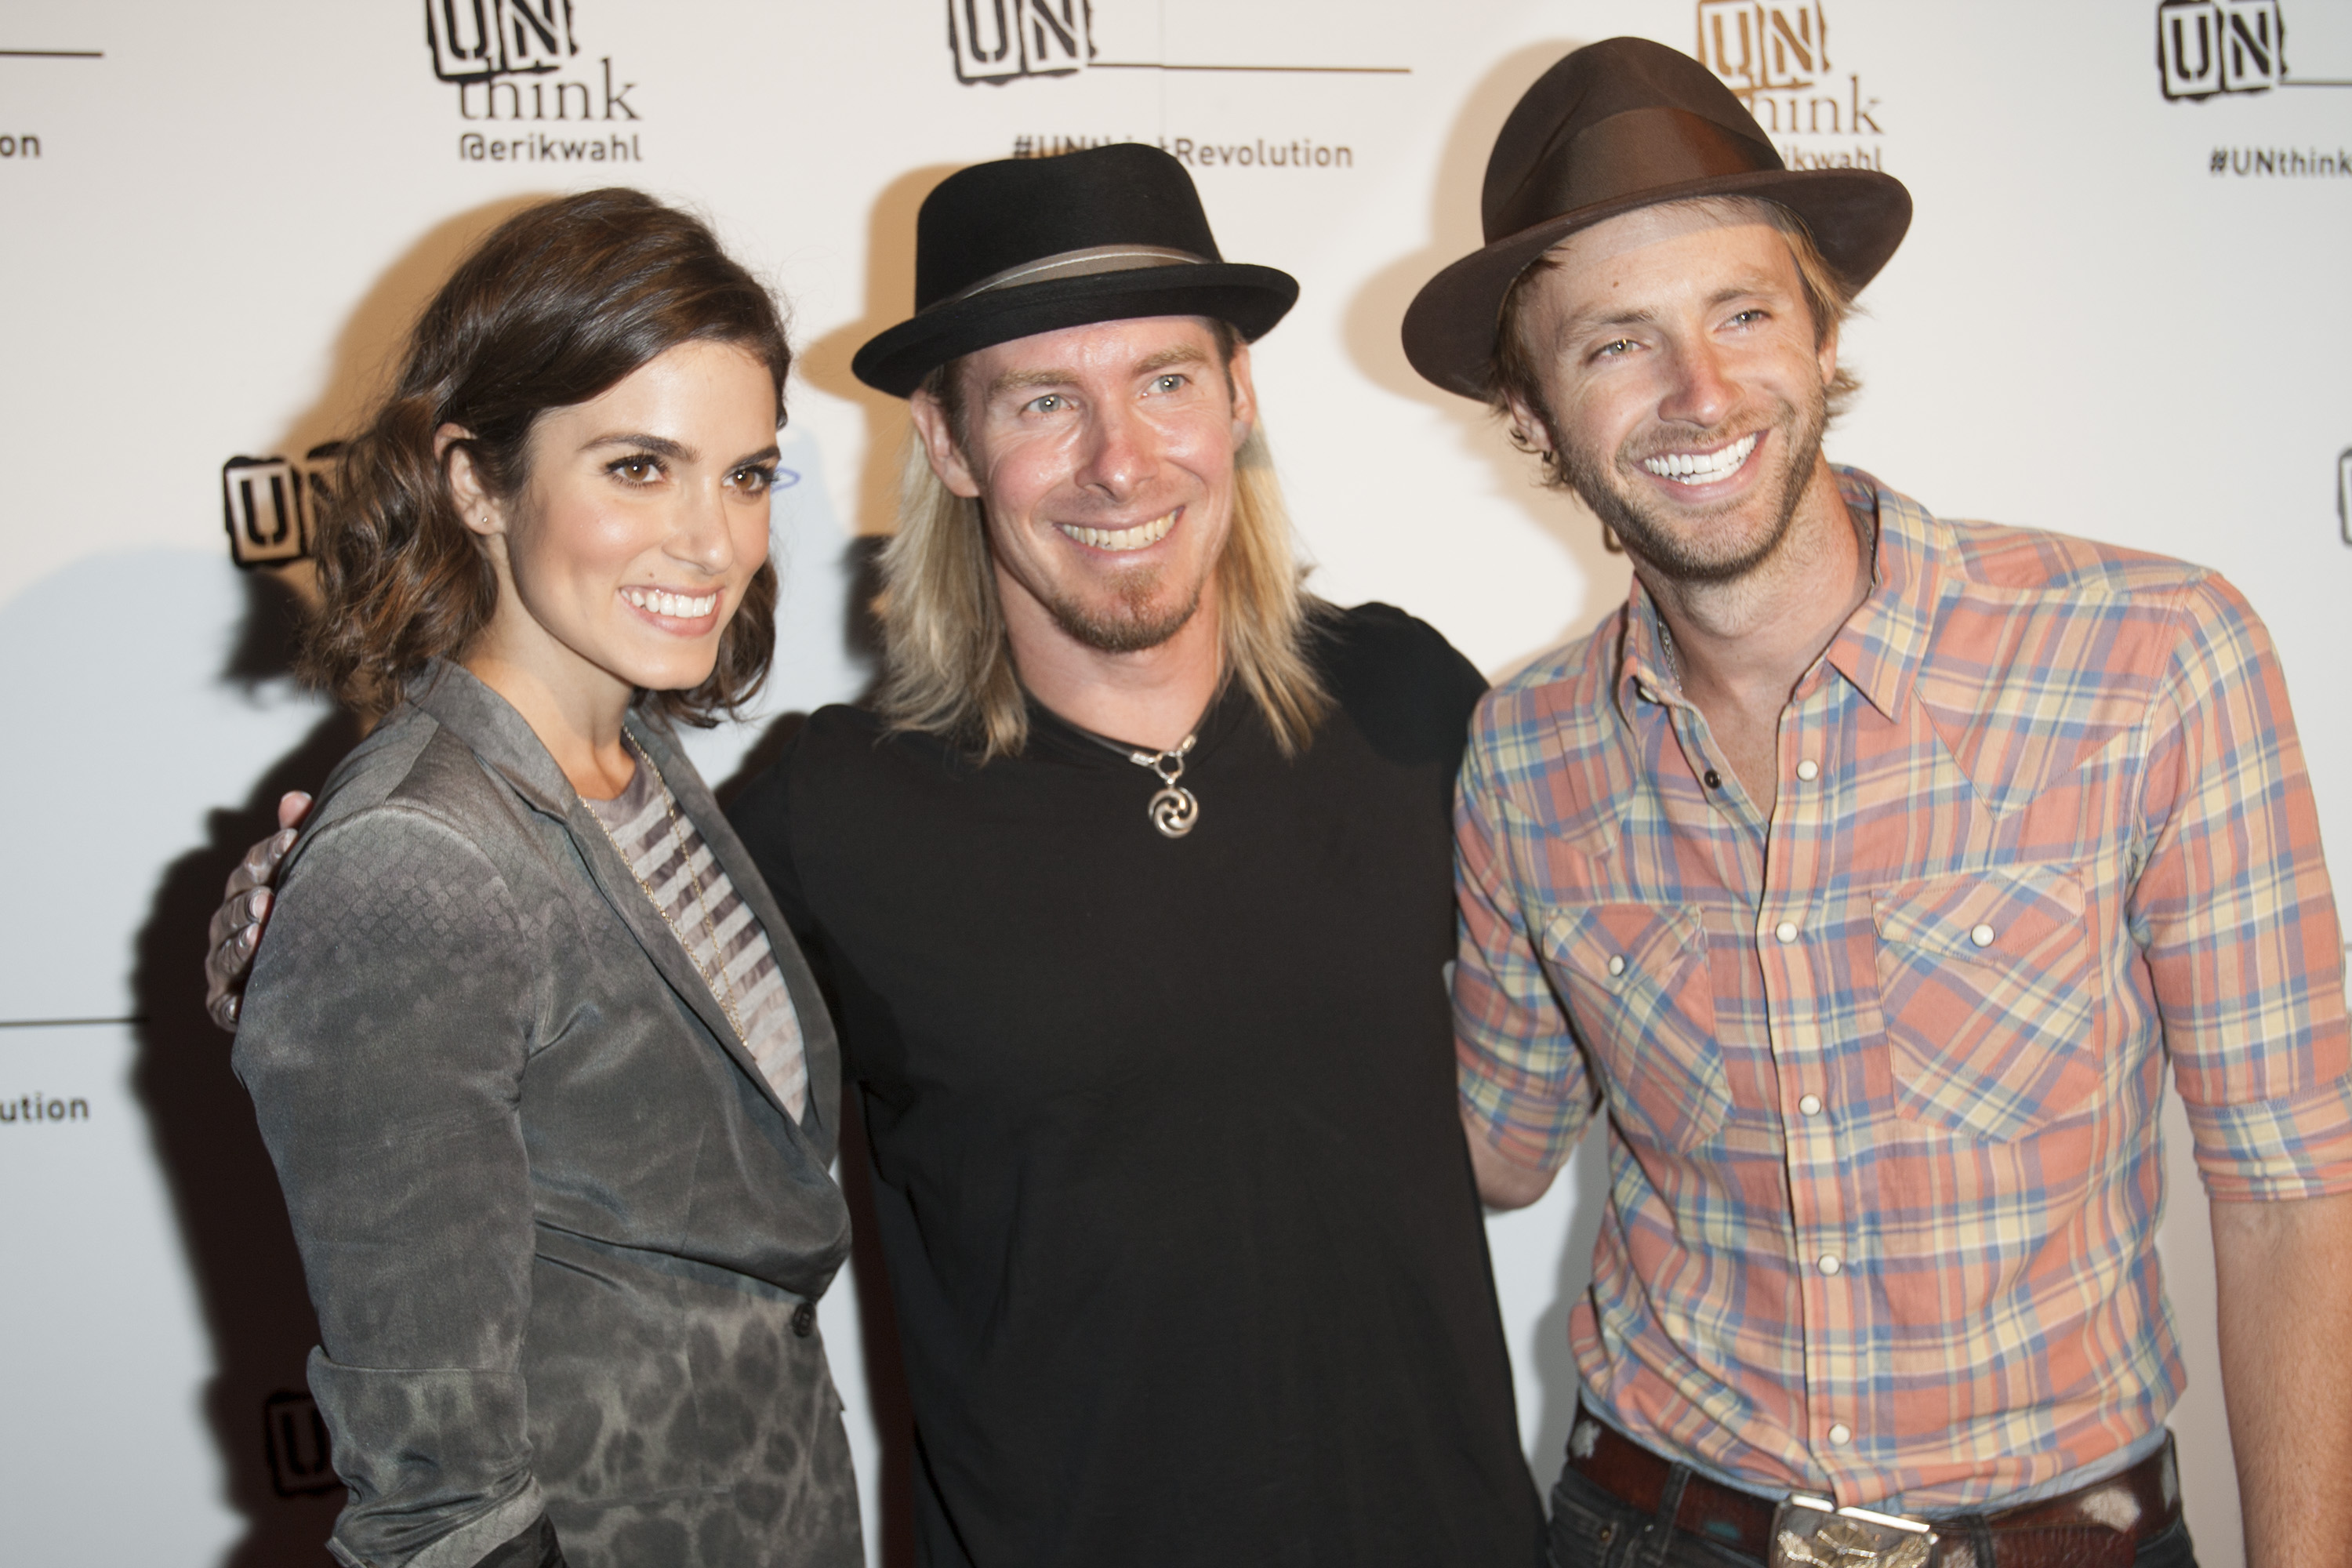 LOS ANGELES, CA - JUNE 04:  Actress/singer Nikki Reed, artist Erik Wahl and singer Paul McDonald attend Erik Wahl's book launch at Bootsy Bellows on June 4, 2013 in Los Angeles, California.  (Photo by Michael Bezjian/WireImage)